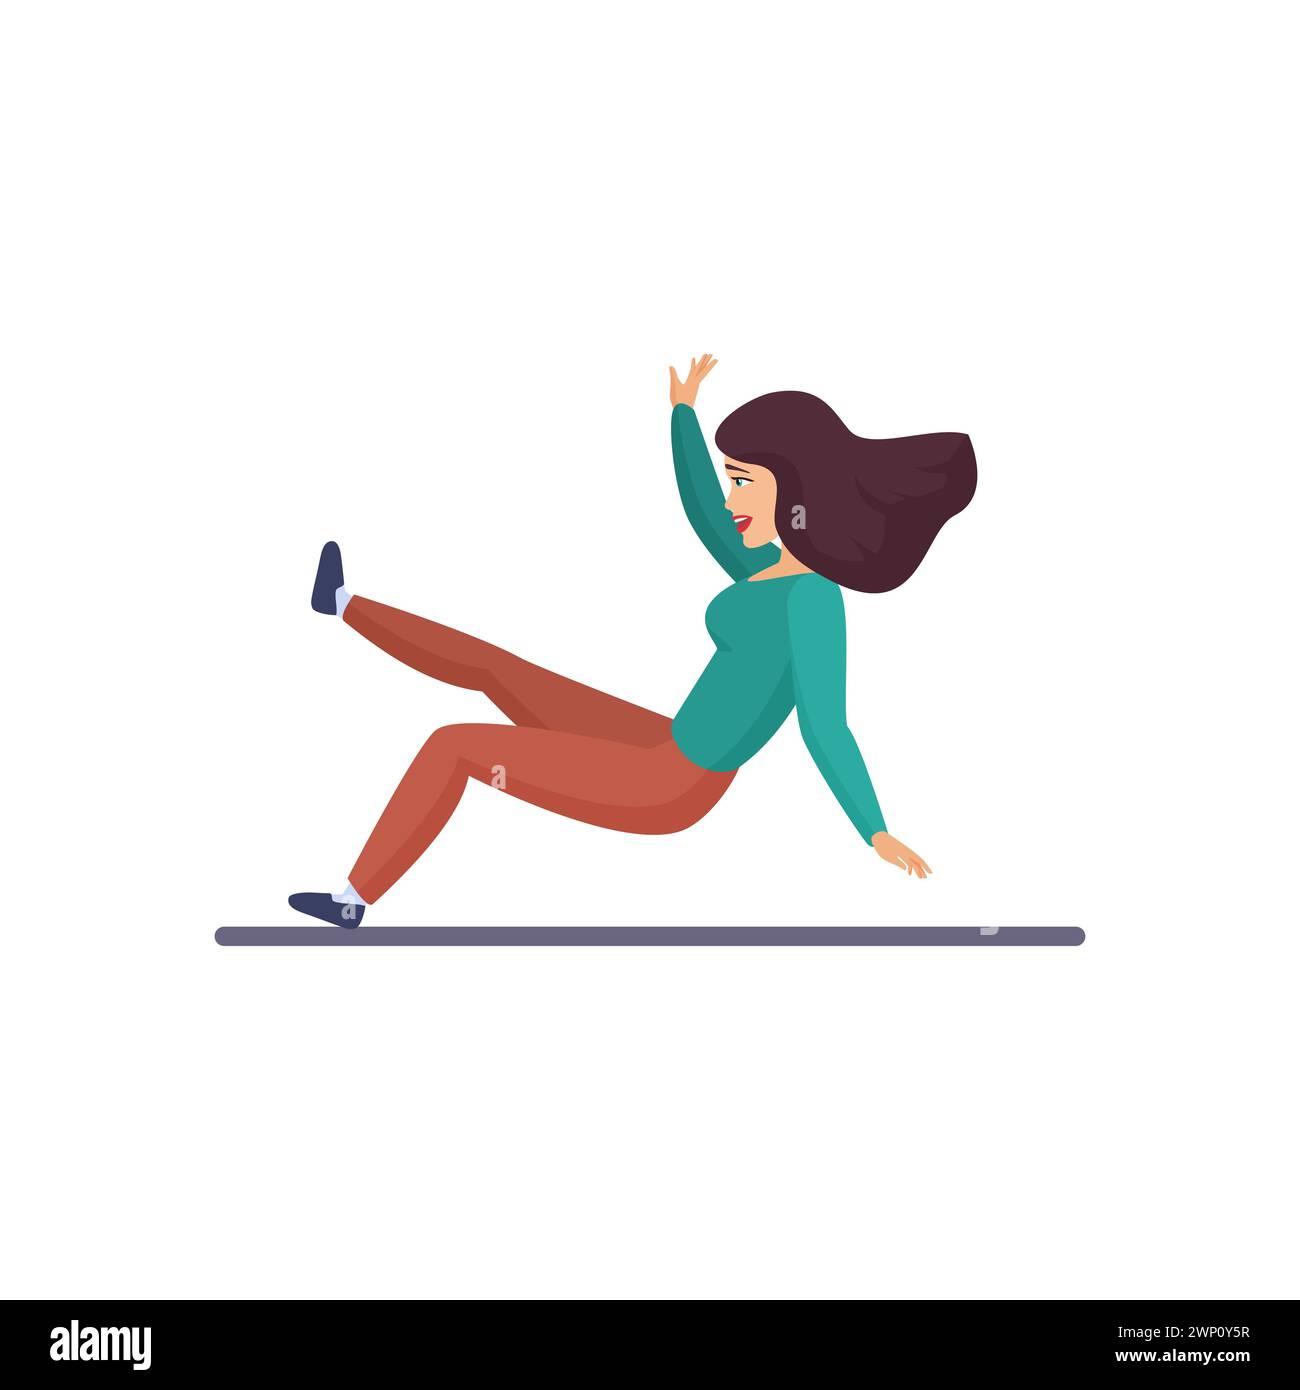 Fall accident of woman on slippery floor or wet surface of road vector illustration Stock Vector